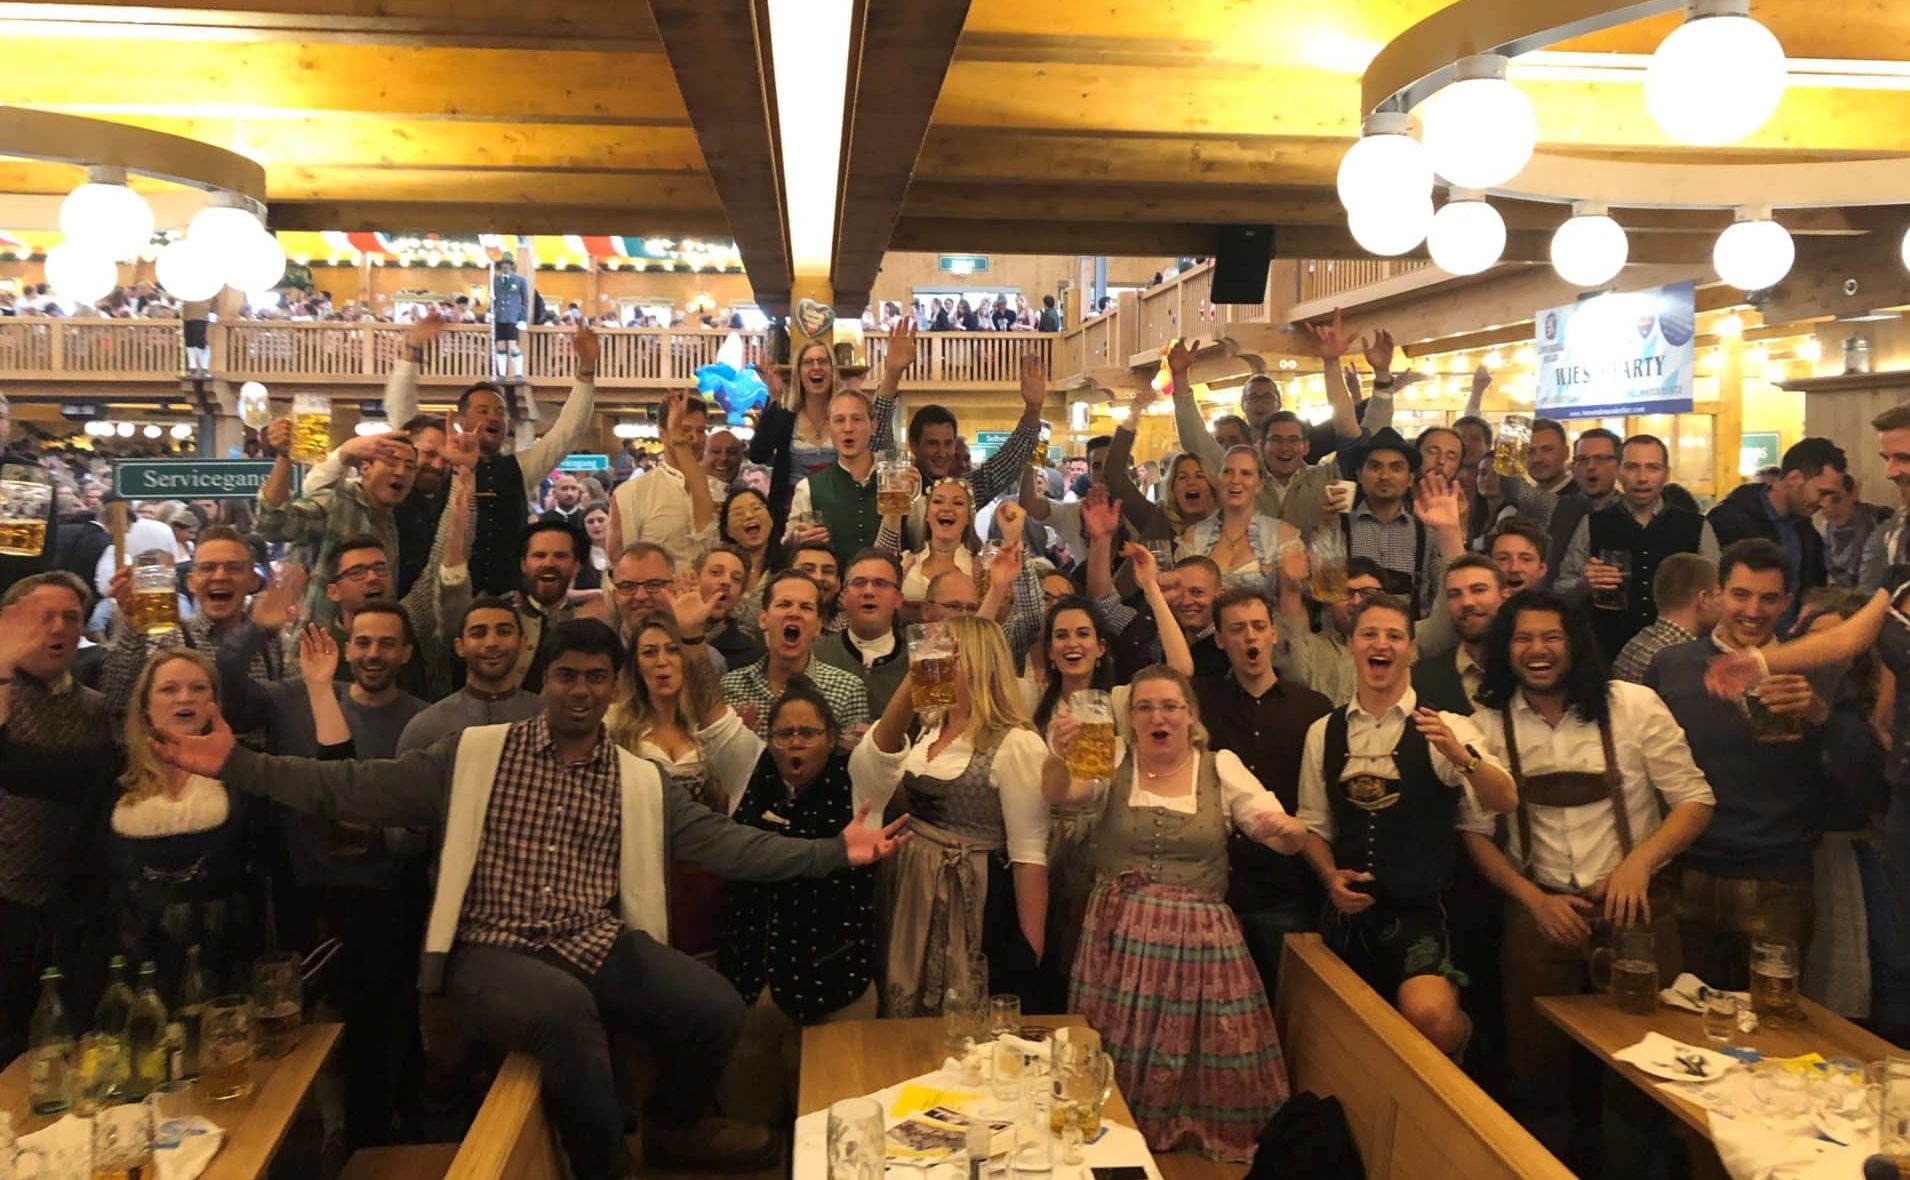 Group picture of the AT staff at the Oktoberfest